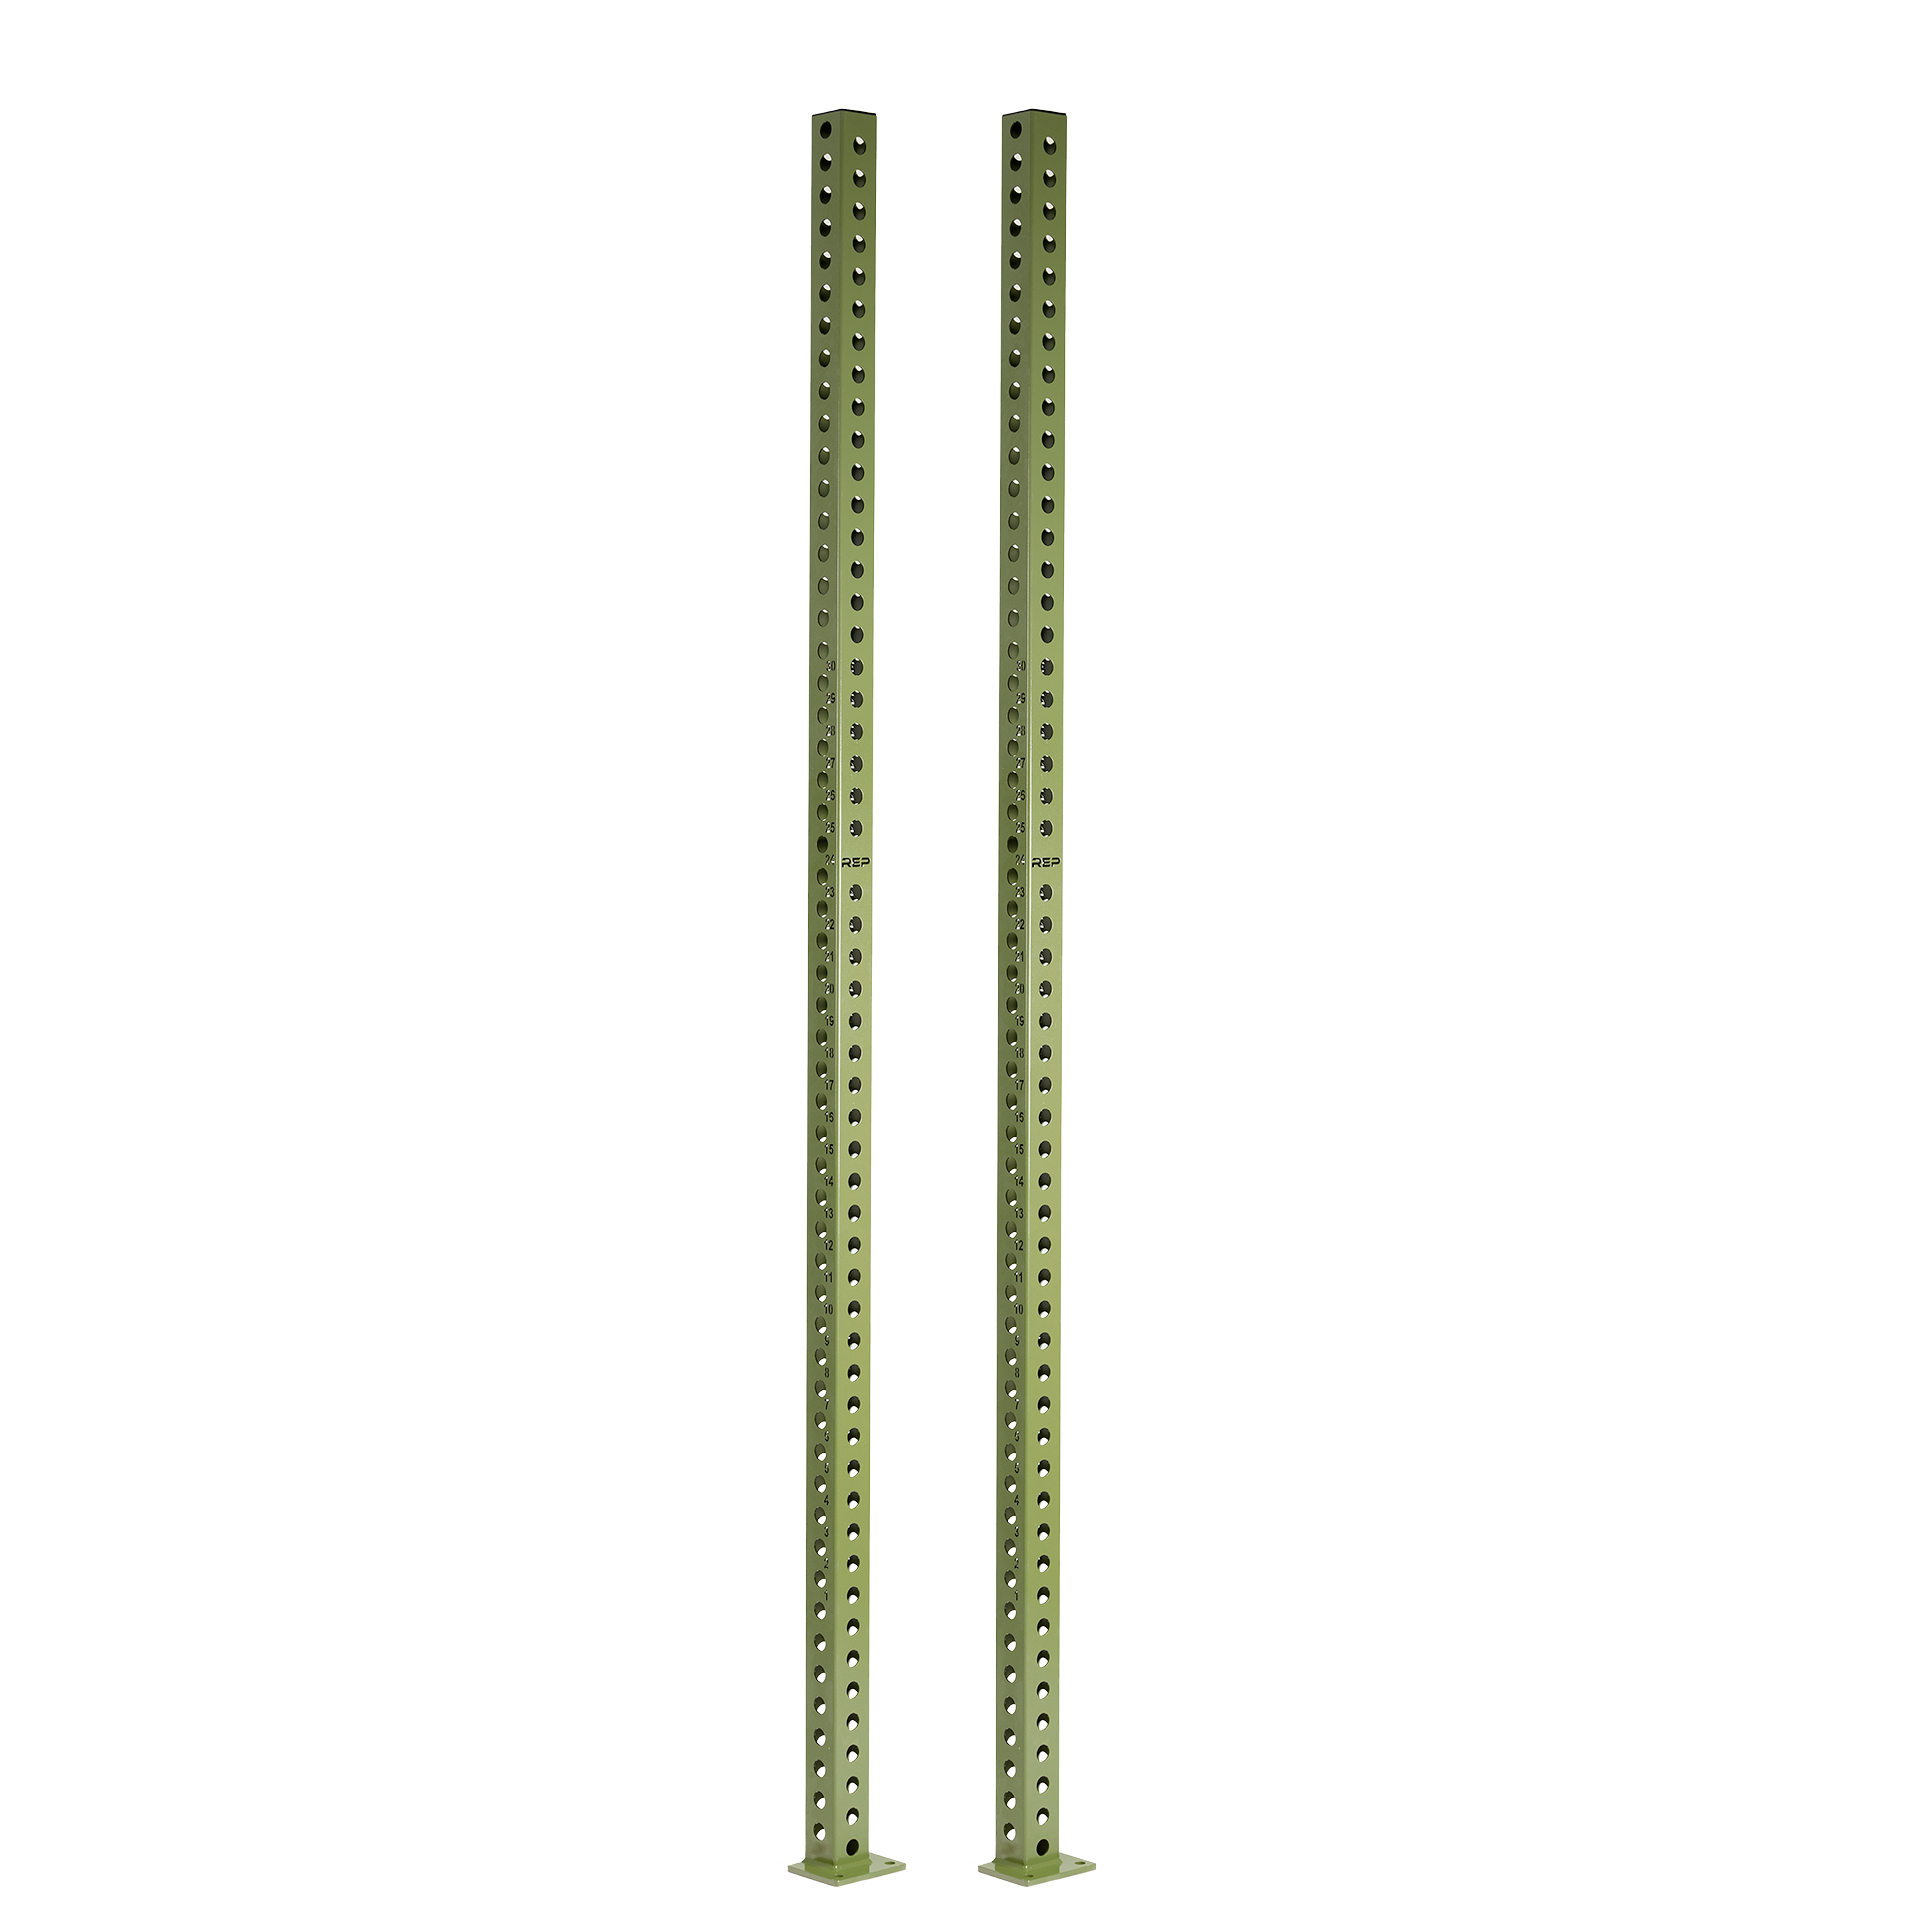 Rig Uprights - 5000 / Pair / Army Green